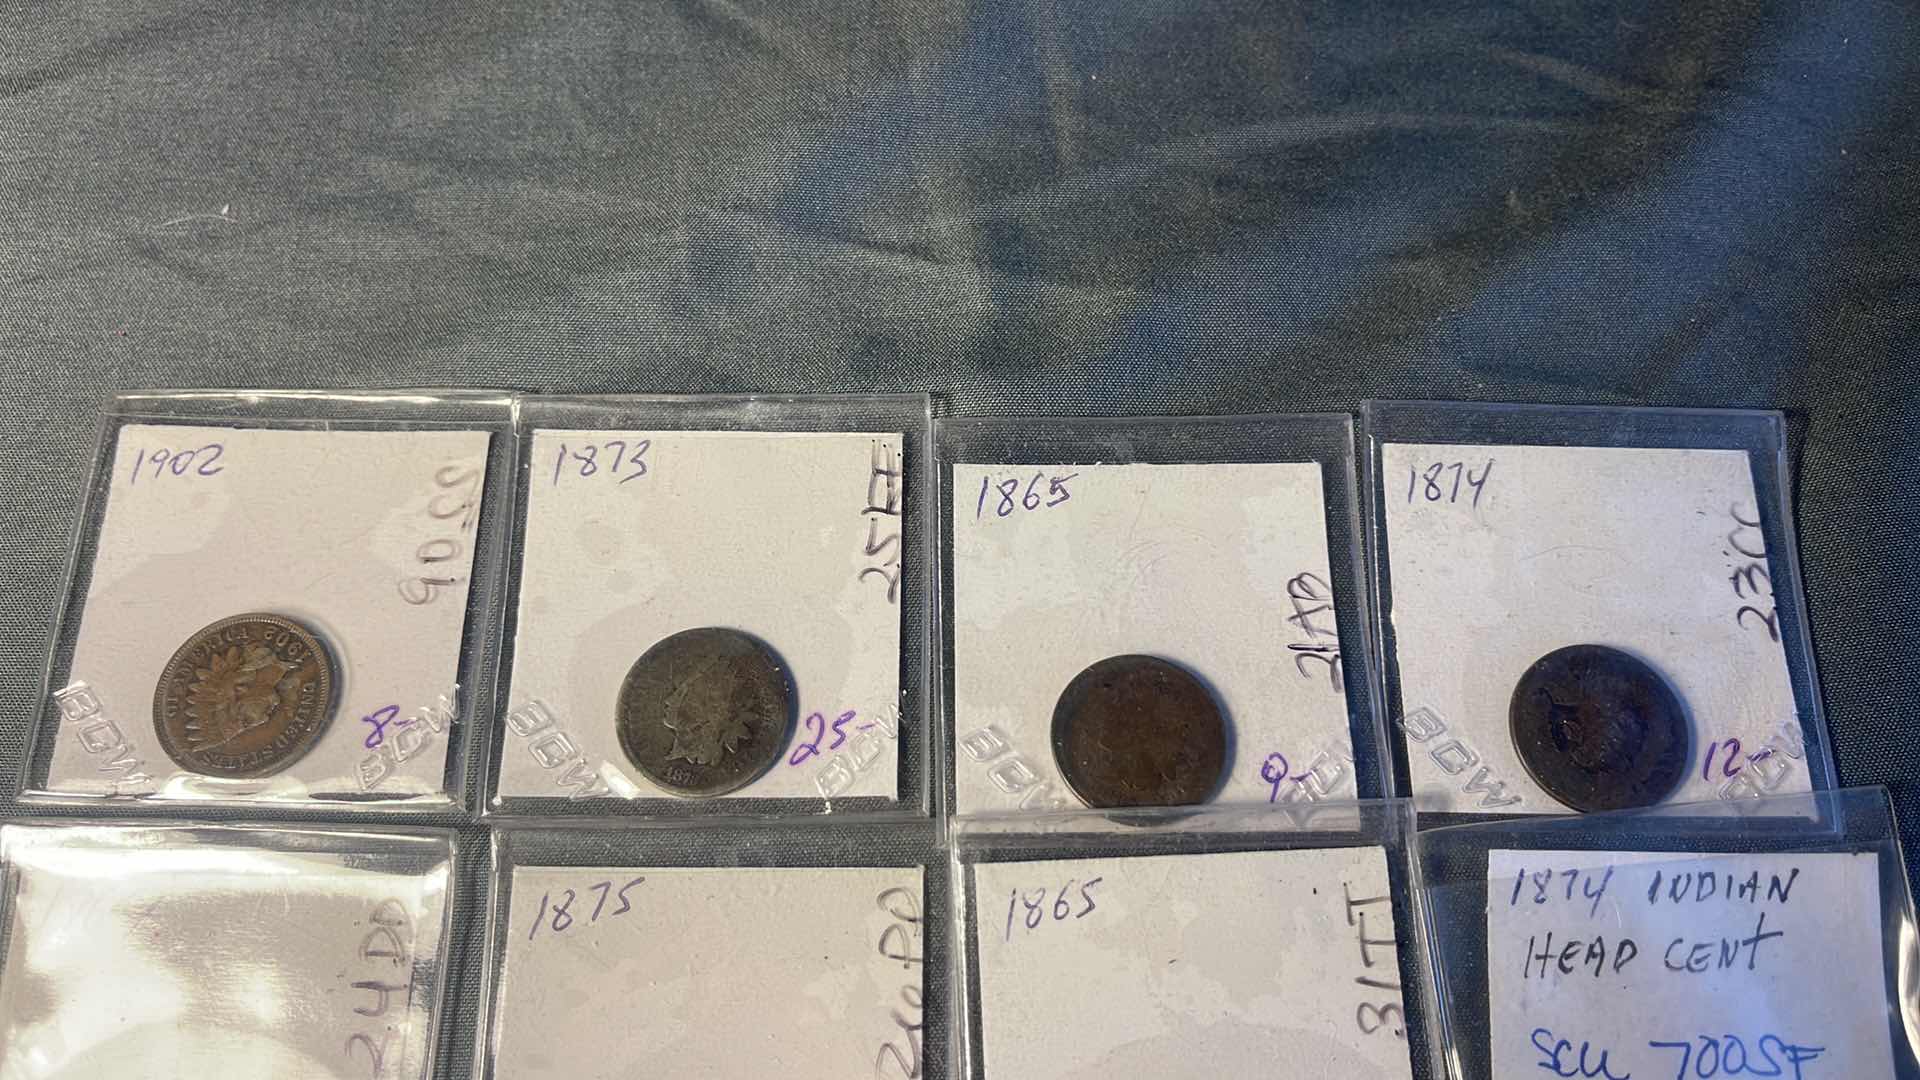 Photo 2 of 8 ANTIQUE INDIAN HEAD COLLECTOR CENT COINS